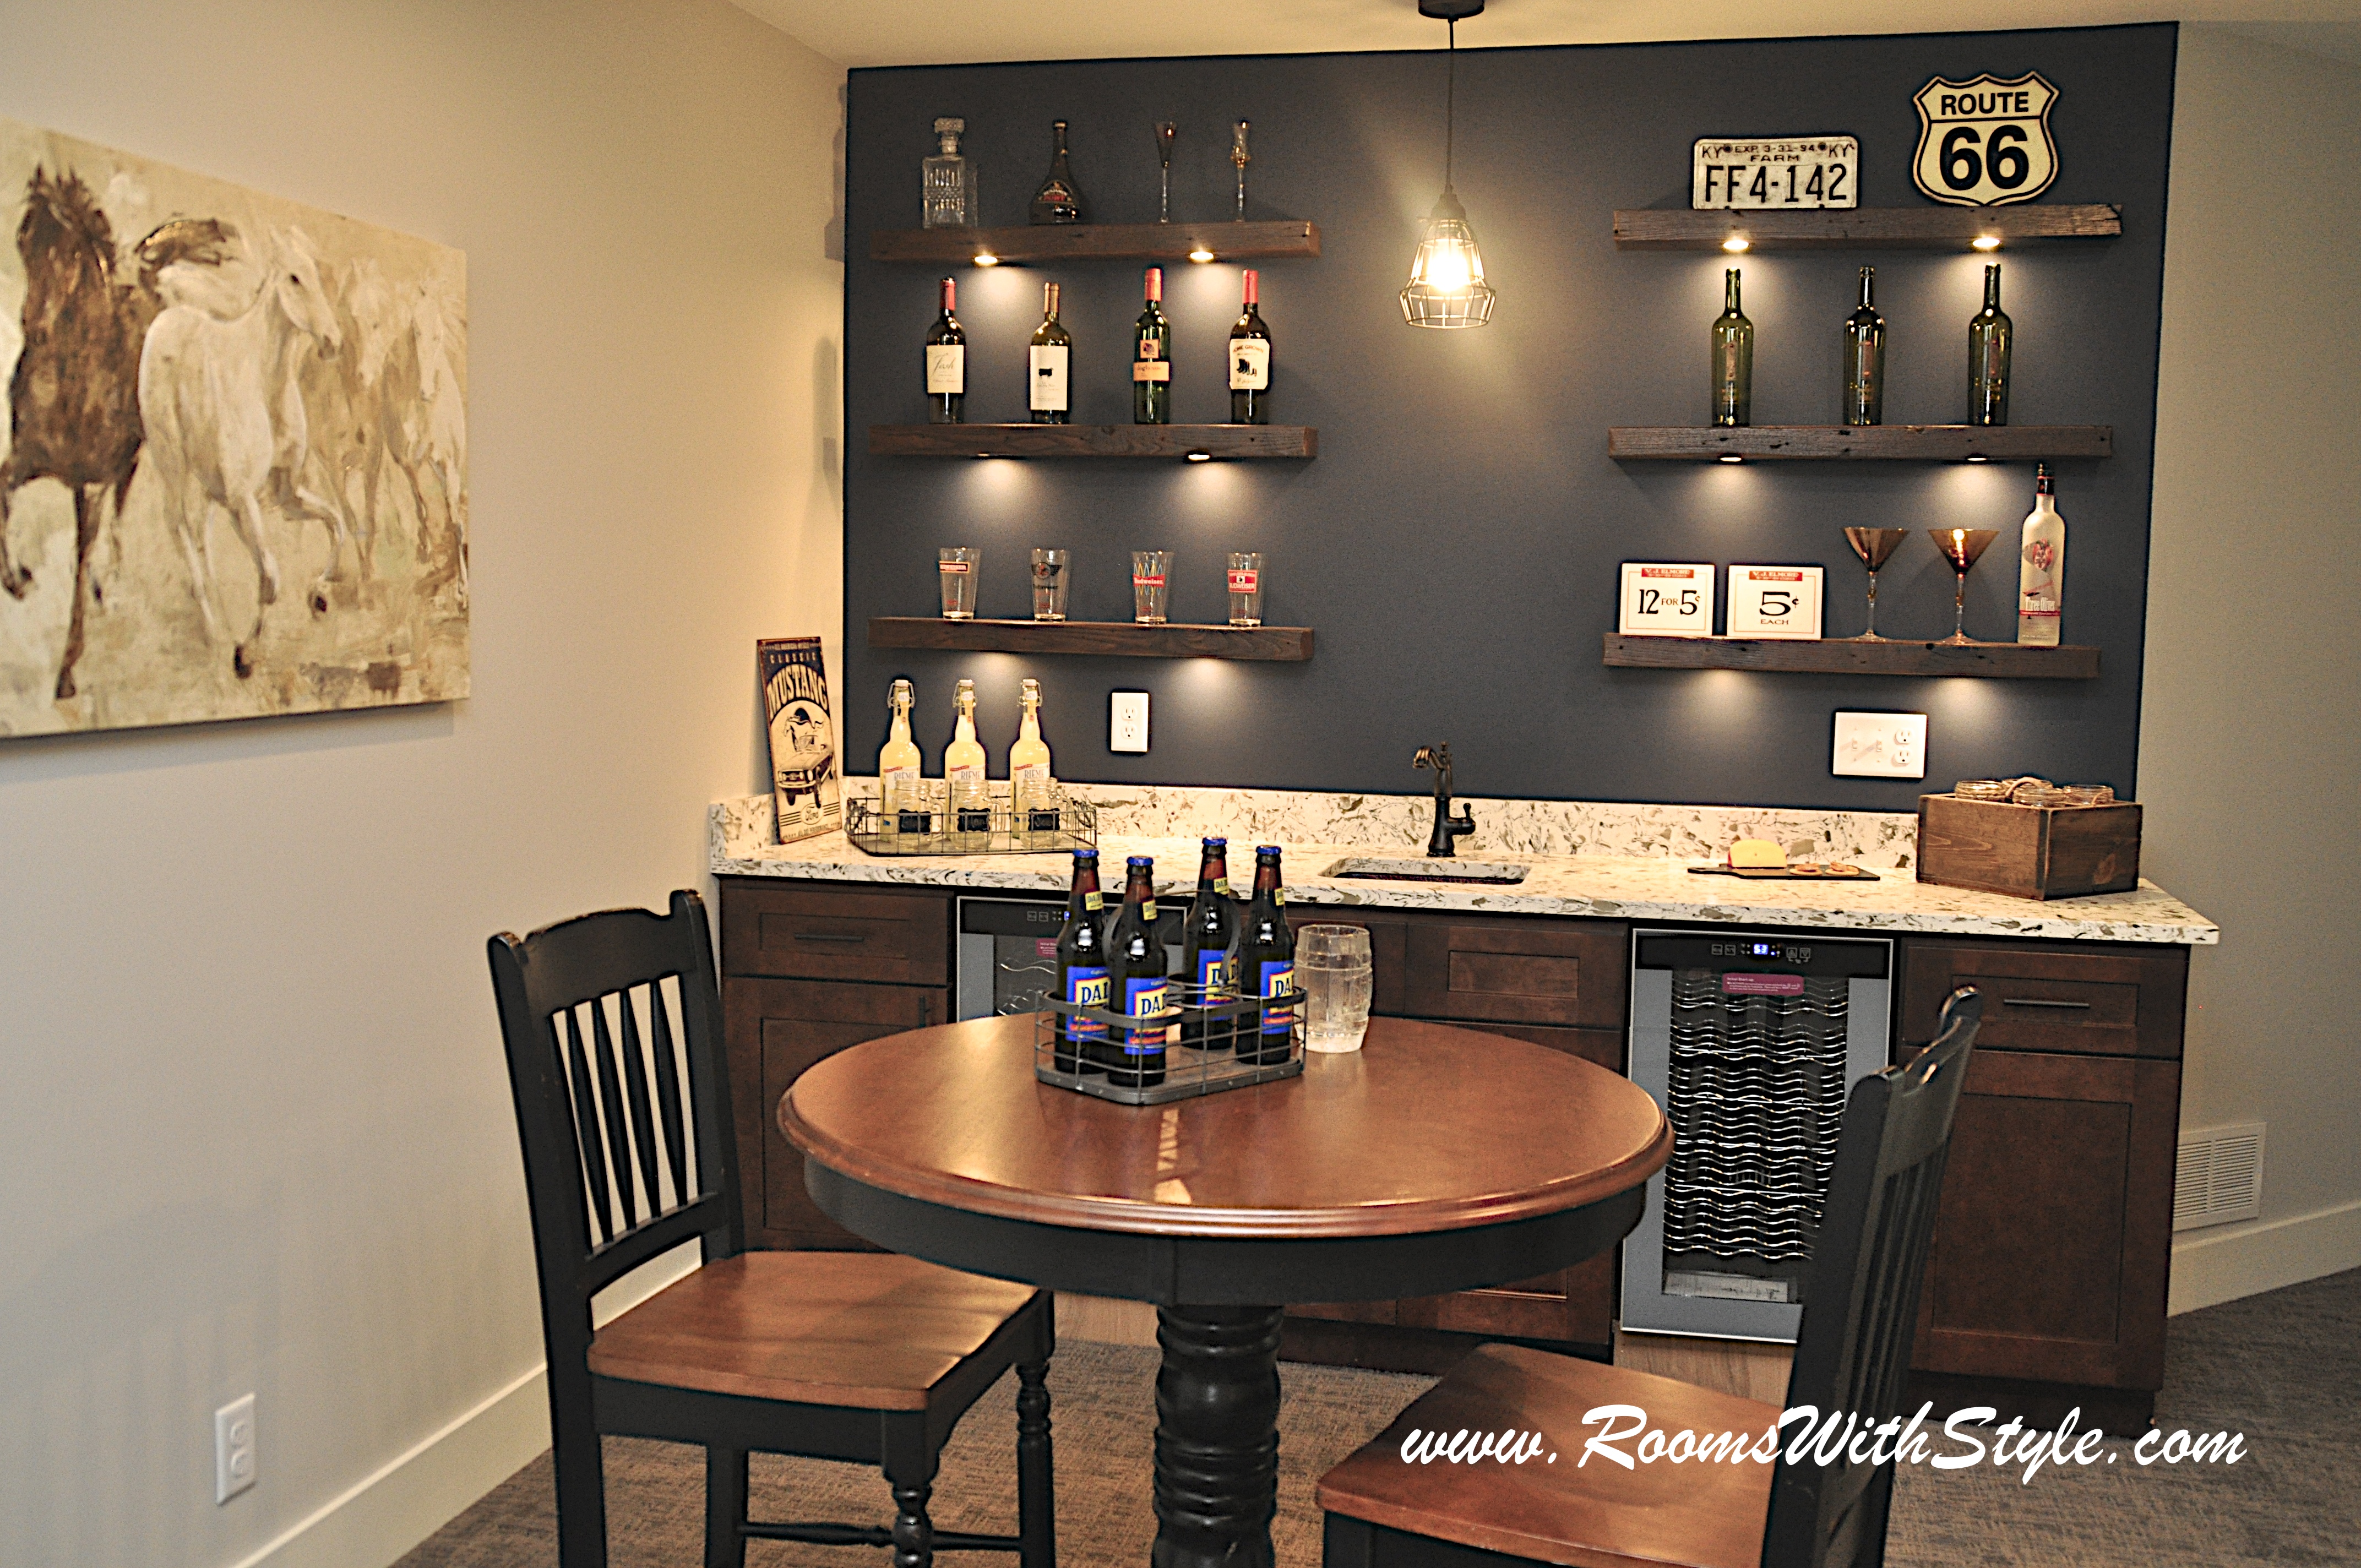 what you think floating shelves homesmsp behind bar the still allow plenty storage area display fun glasses bottles wine and couple eclectic accent pieces selected for this